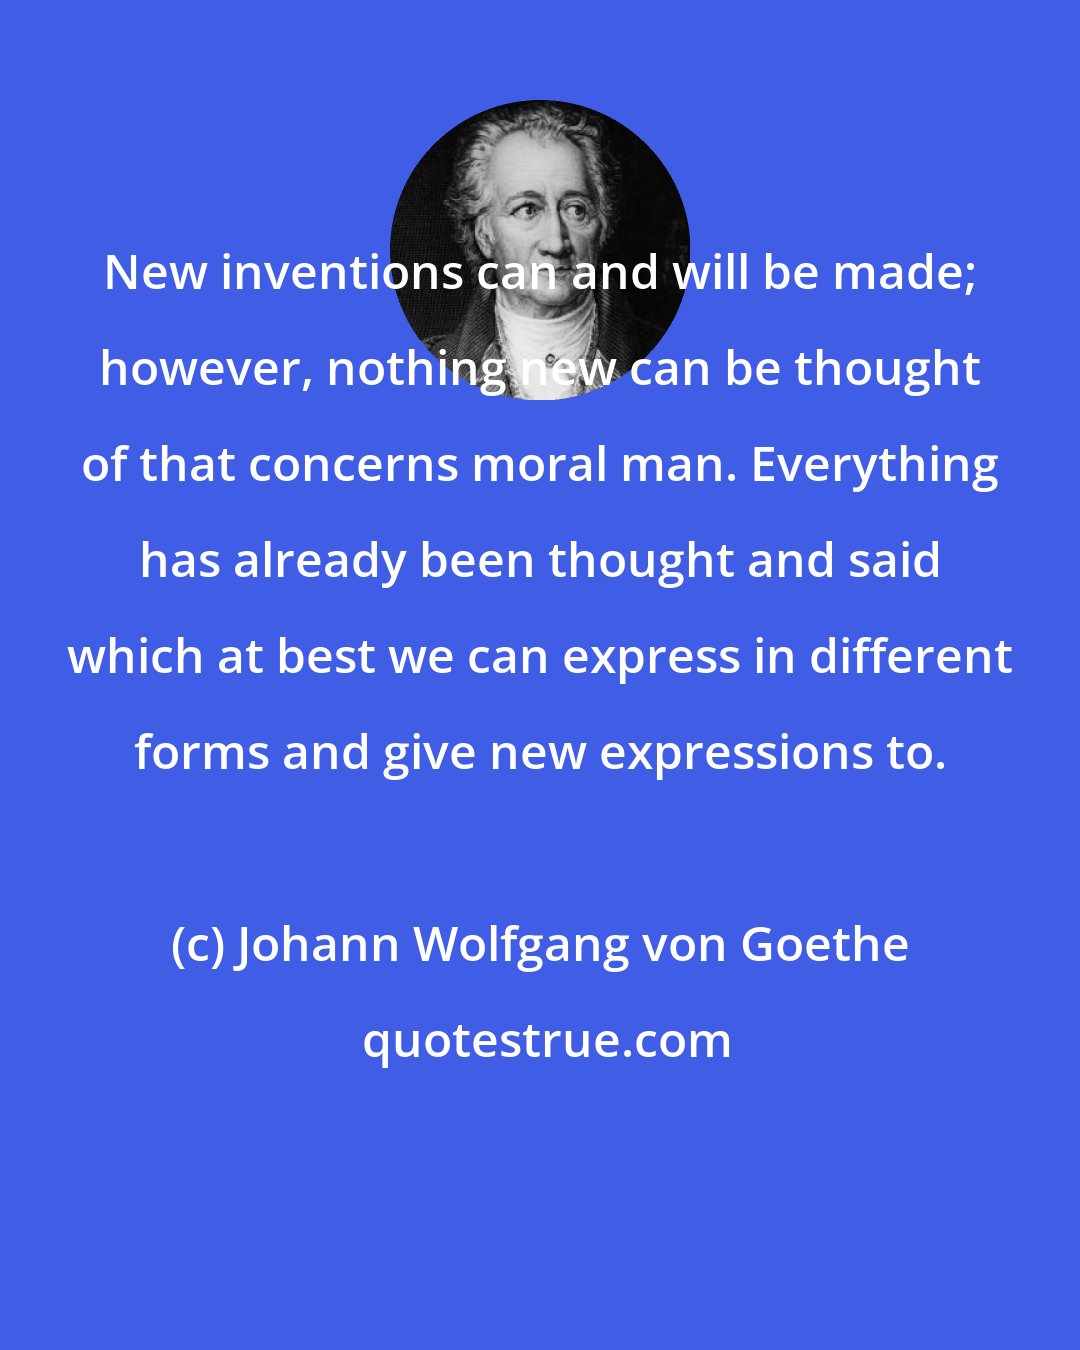 Johann Wolfgang von Goethe: New inventions can and will be made; however, nothing new can be thought of that concerns moral man. Everything has already been thought and said which at best we can express in different forms and give new expressions to.